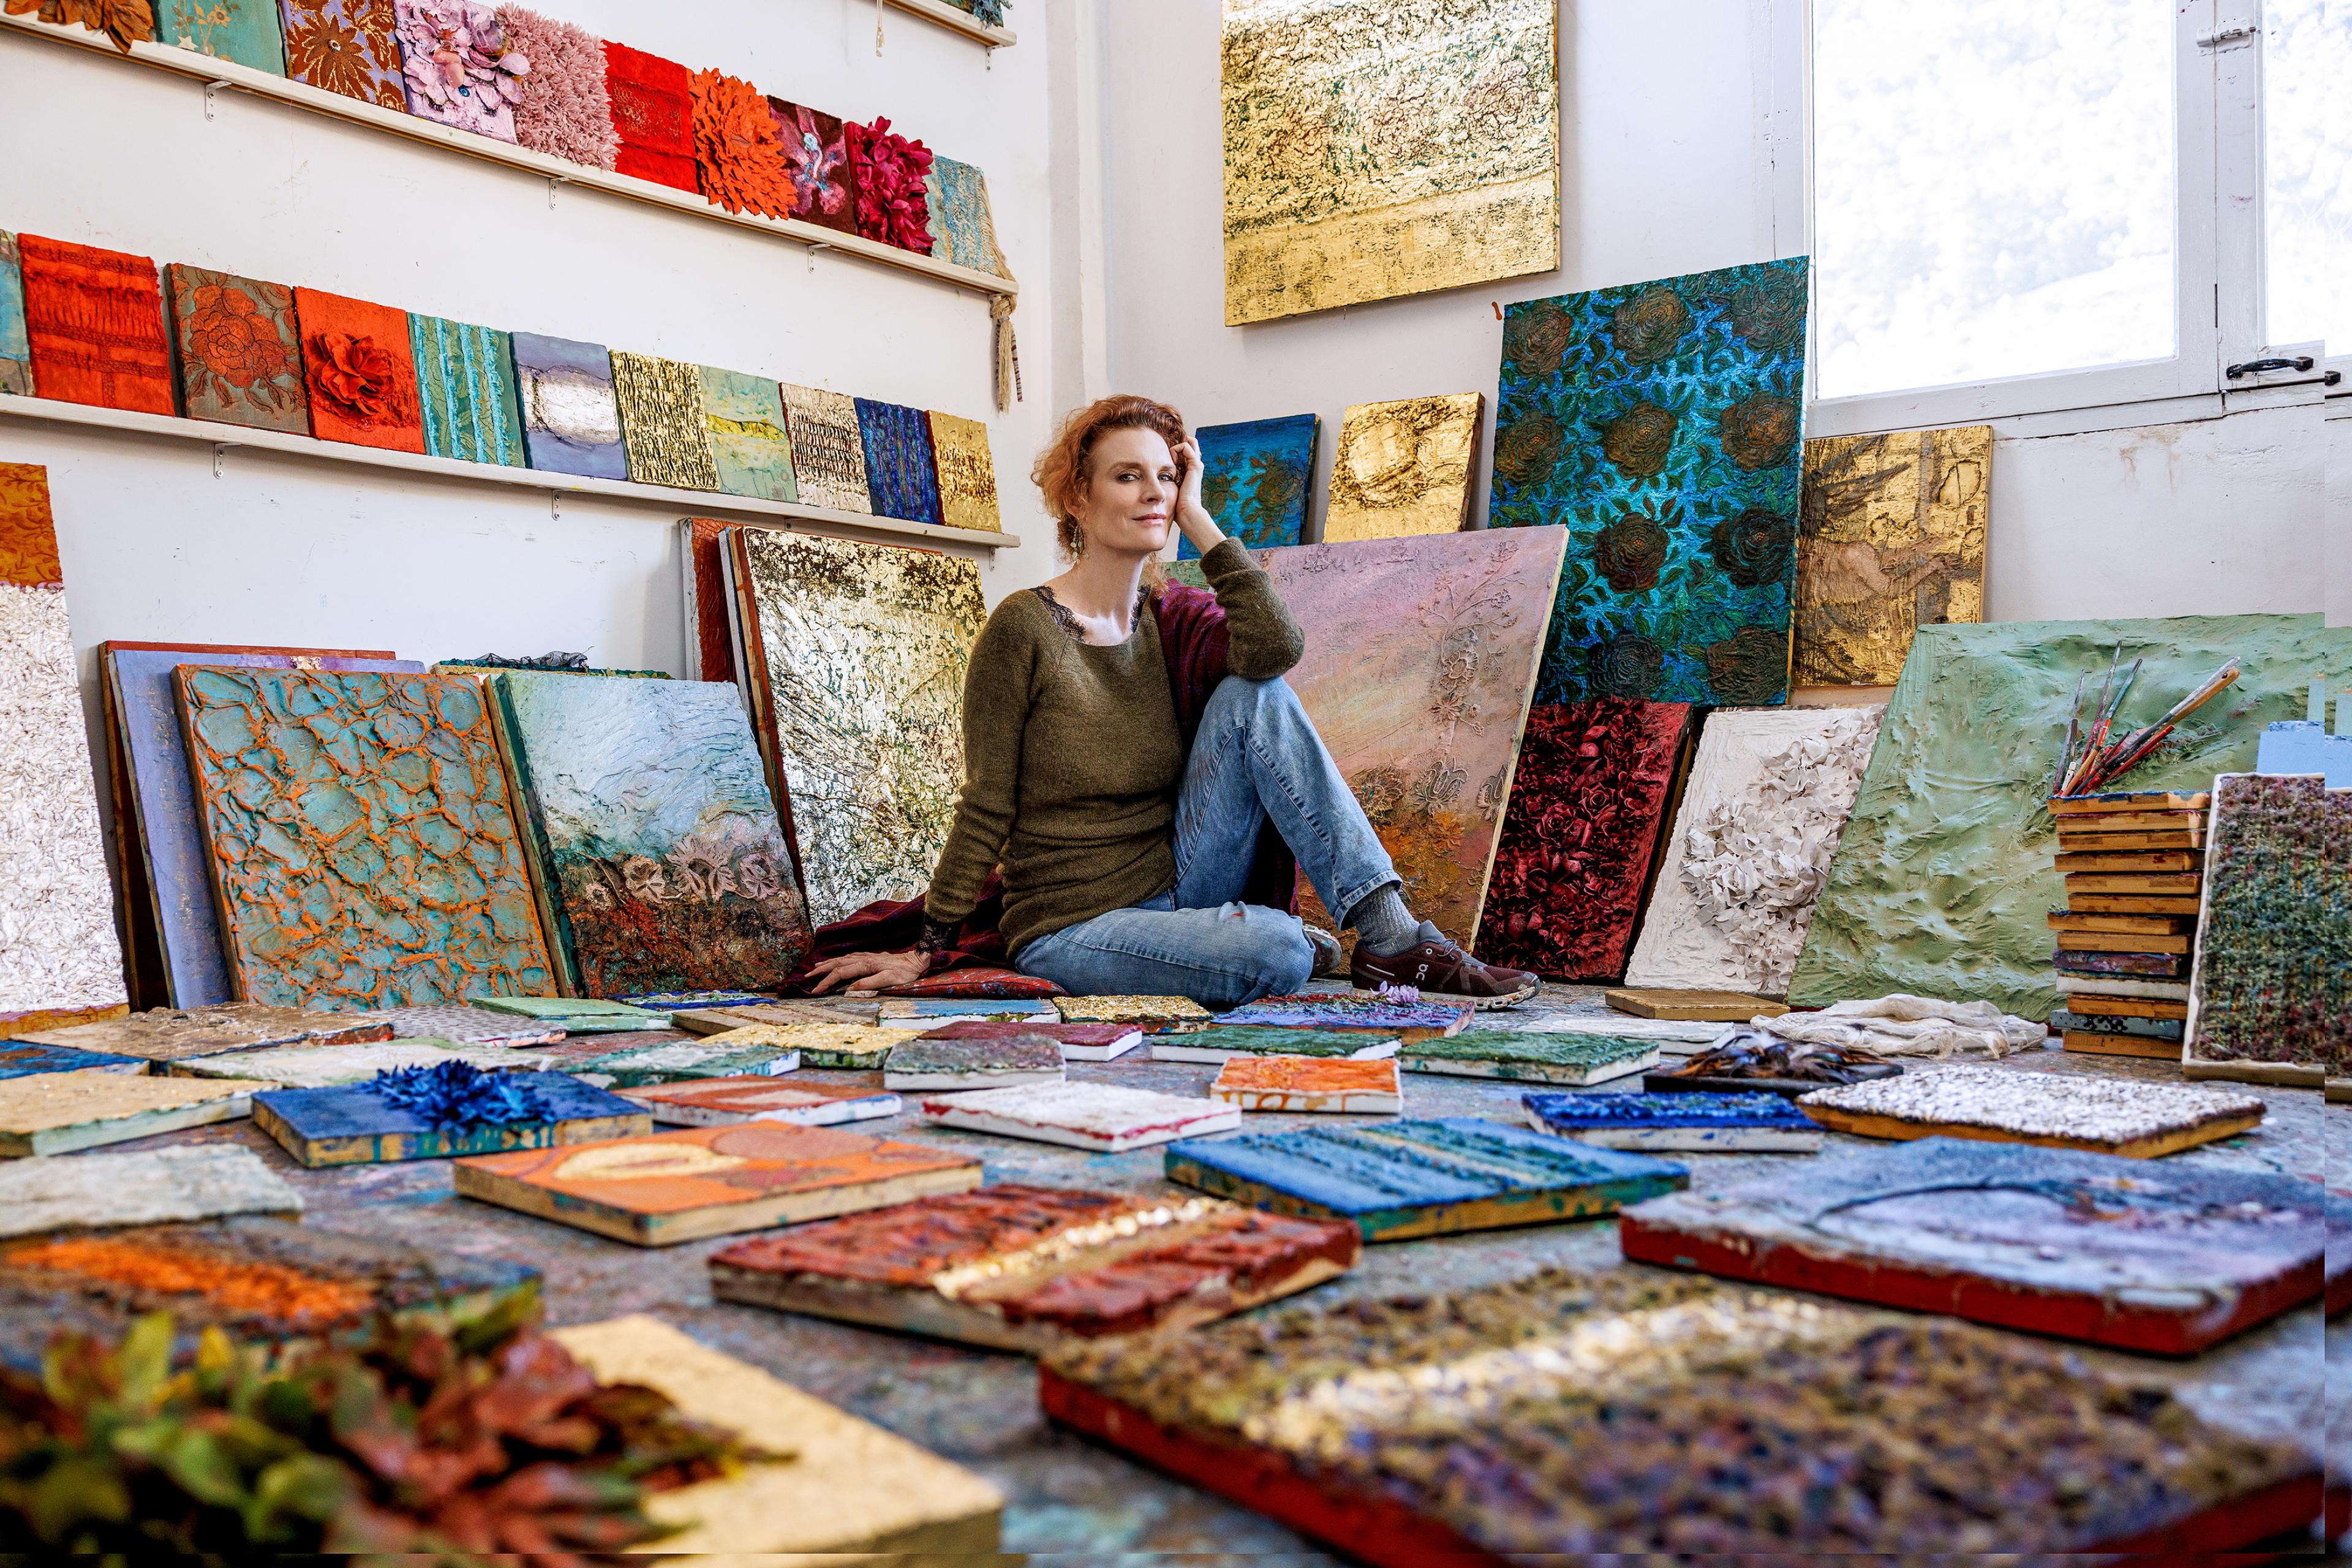 woman with red hair sitting on floor surrounded by colorful abstract paintings arranged on floor and stacked by wall